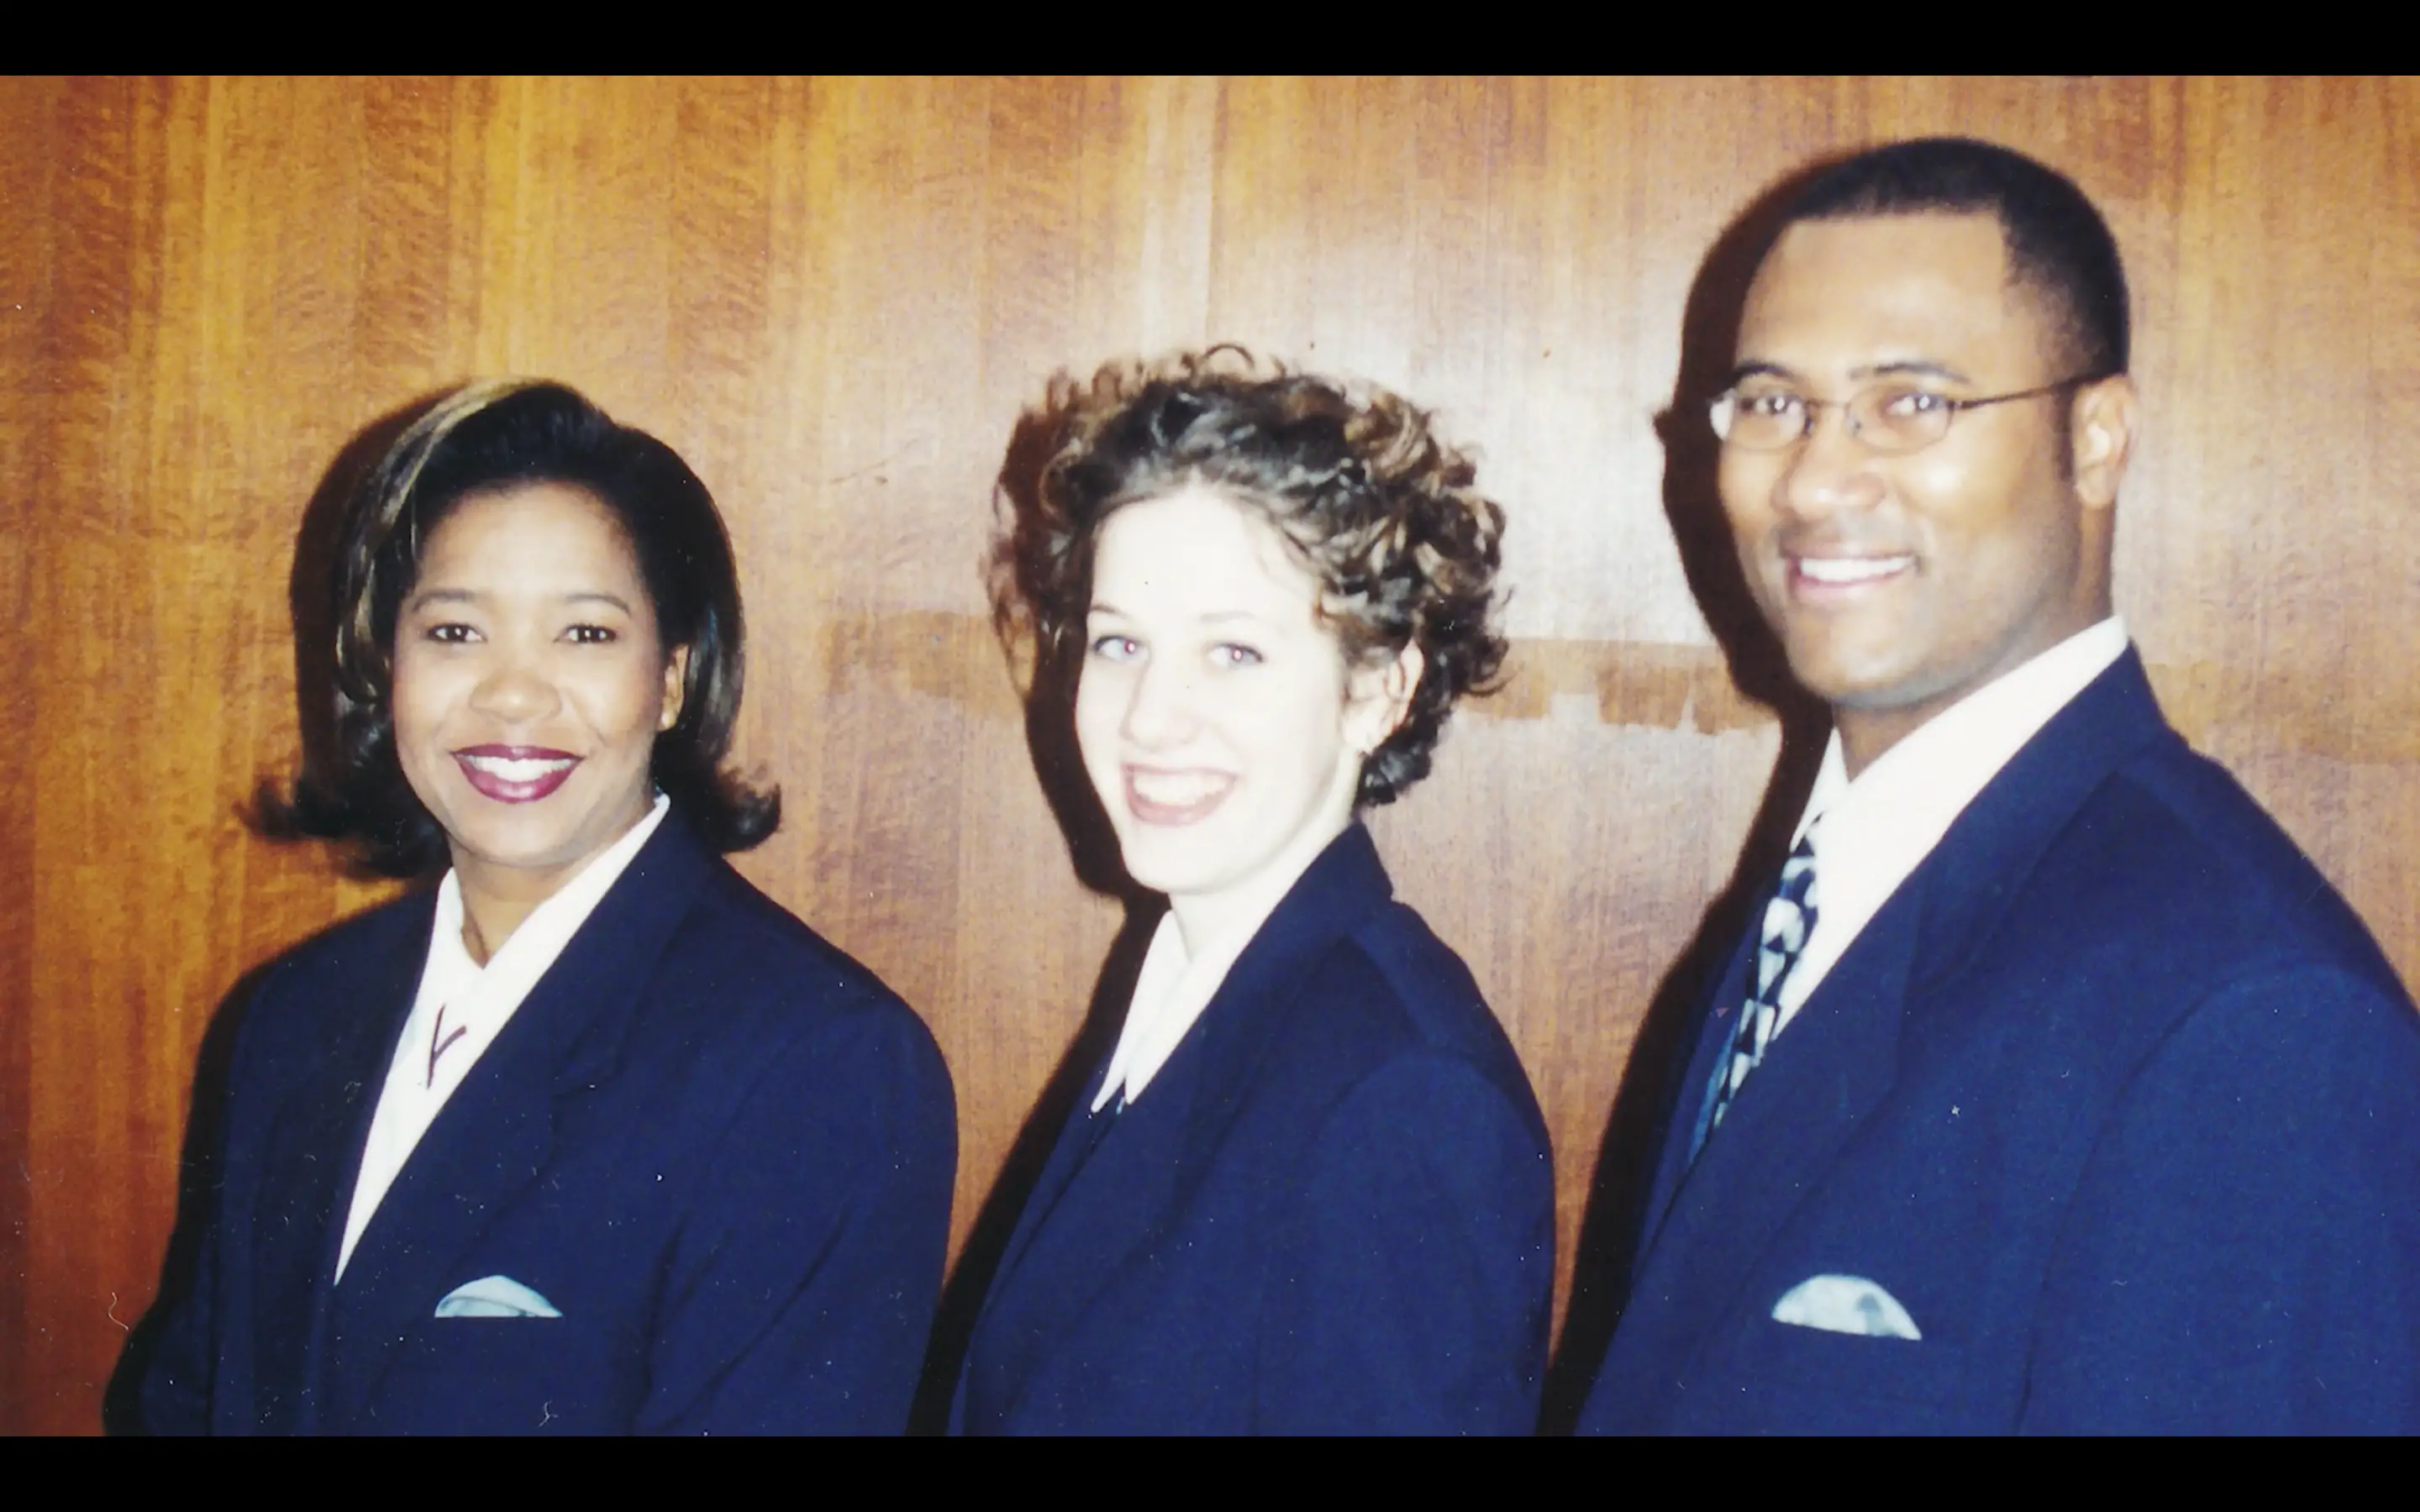 CeeCee Ross-Lyles and two colleagues | Source: youtube.com/@Flight93NationalMemorial